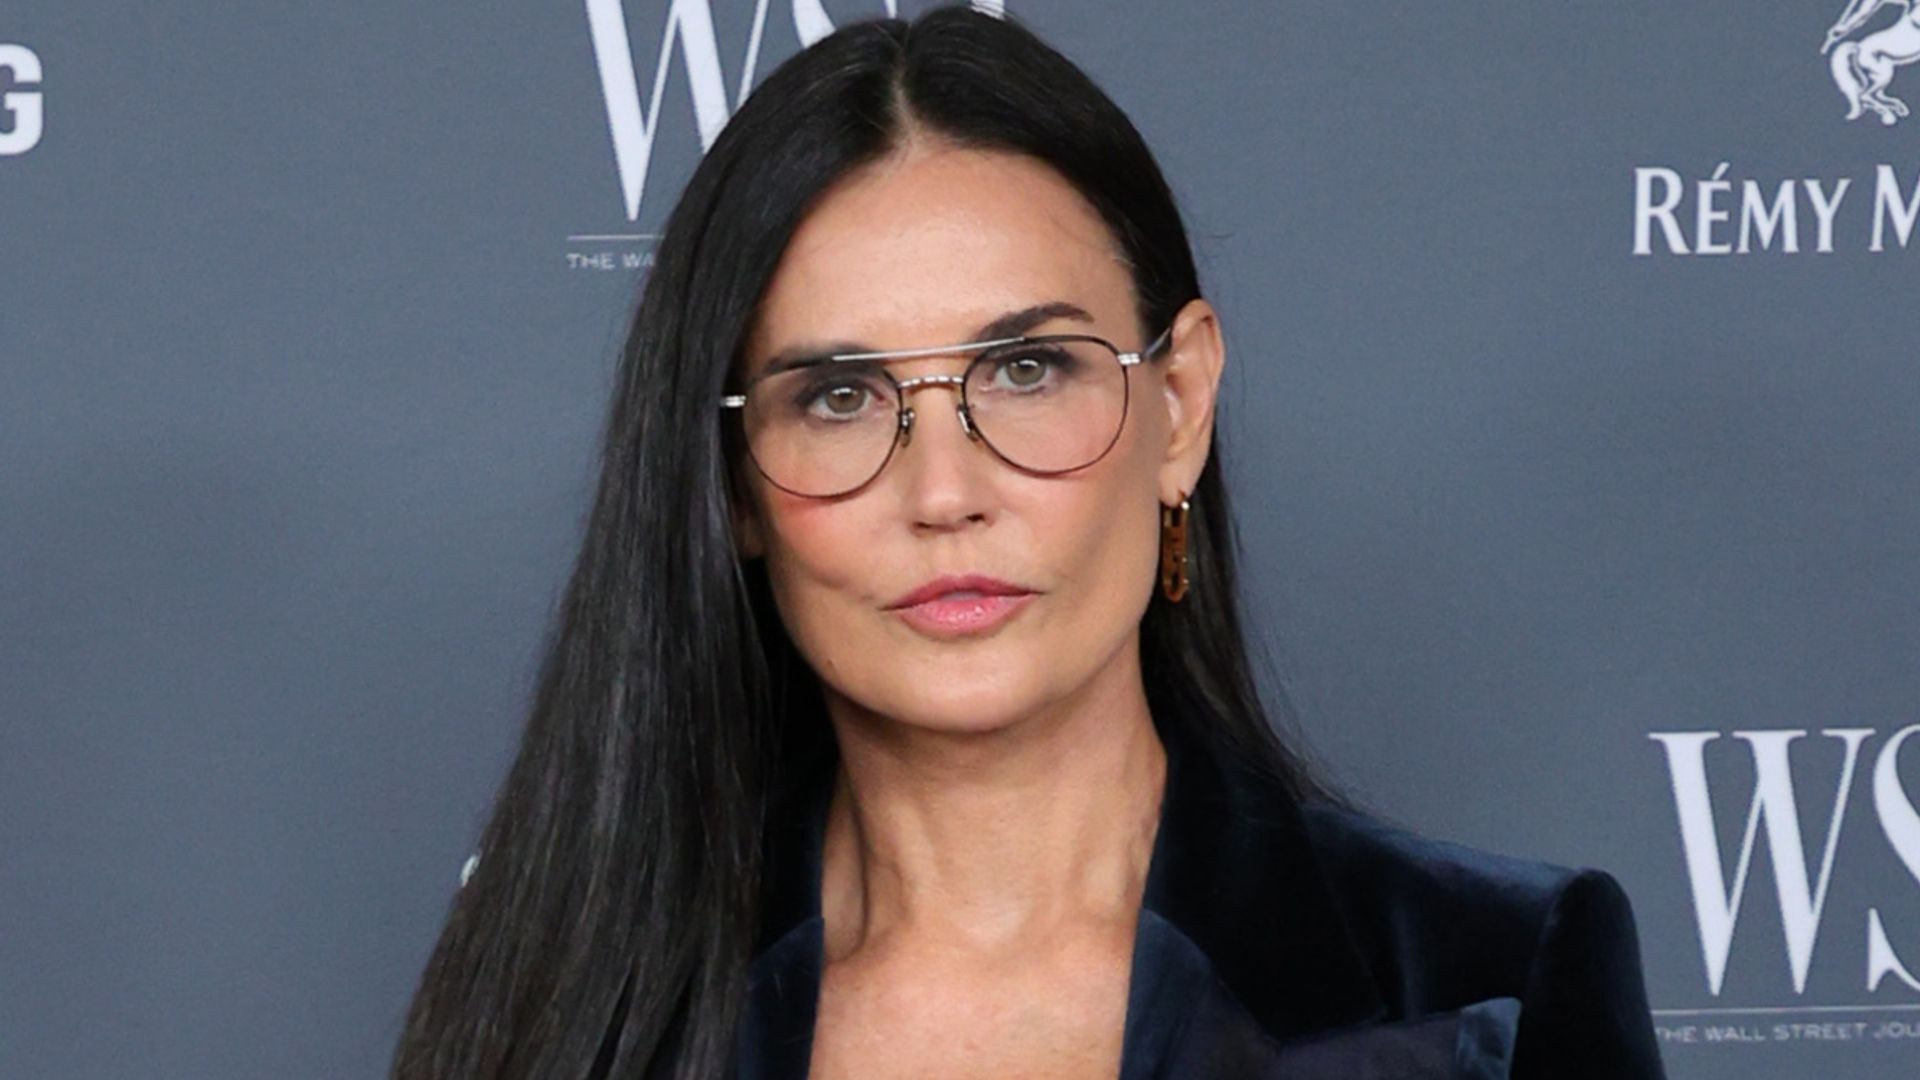 Demi Moore shows off iconic black gown for bittersweet tribute to Thierry Mugler